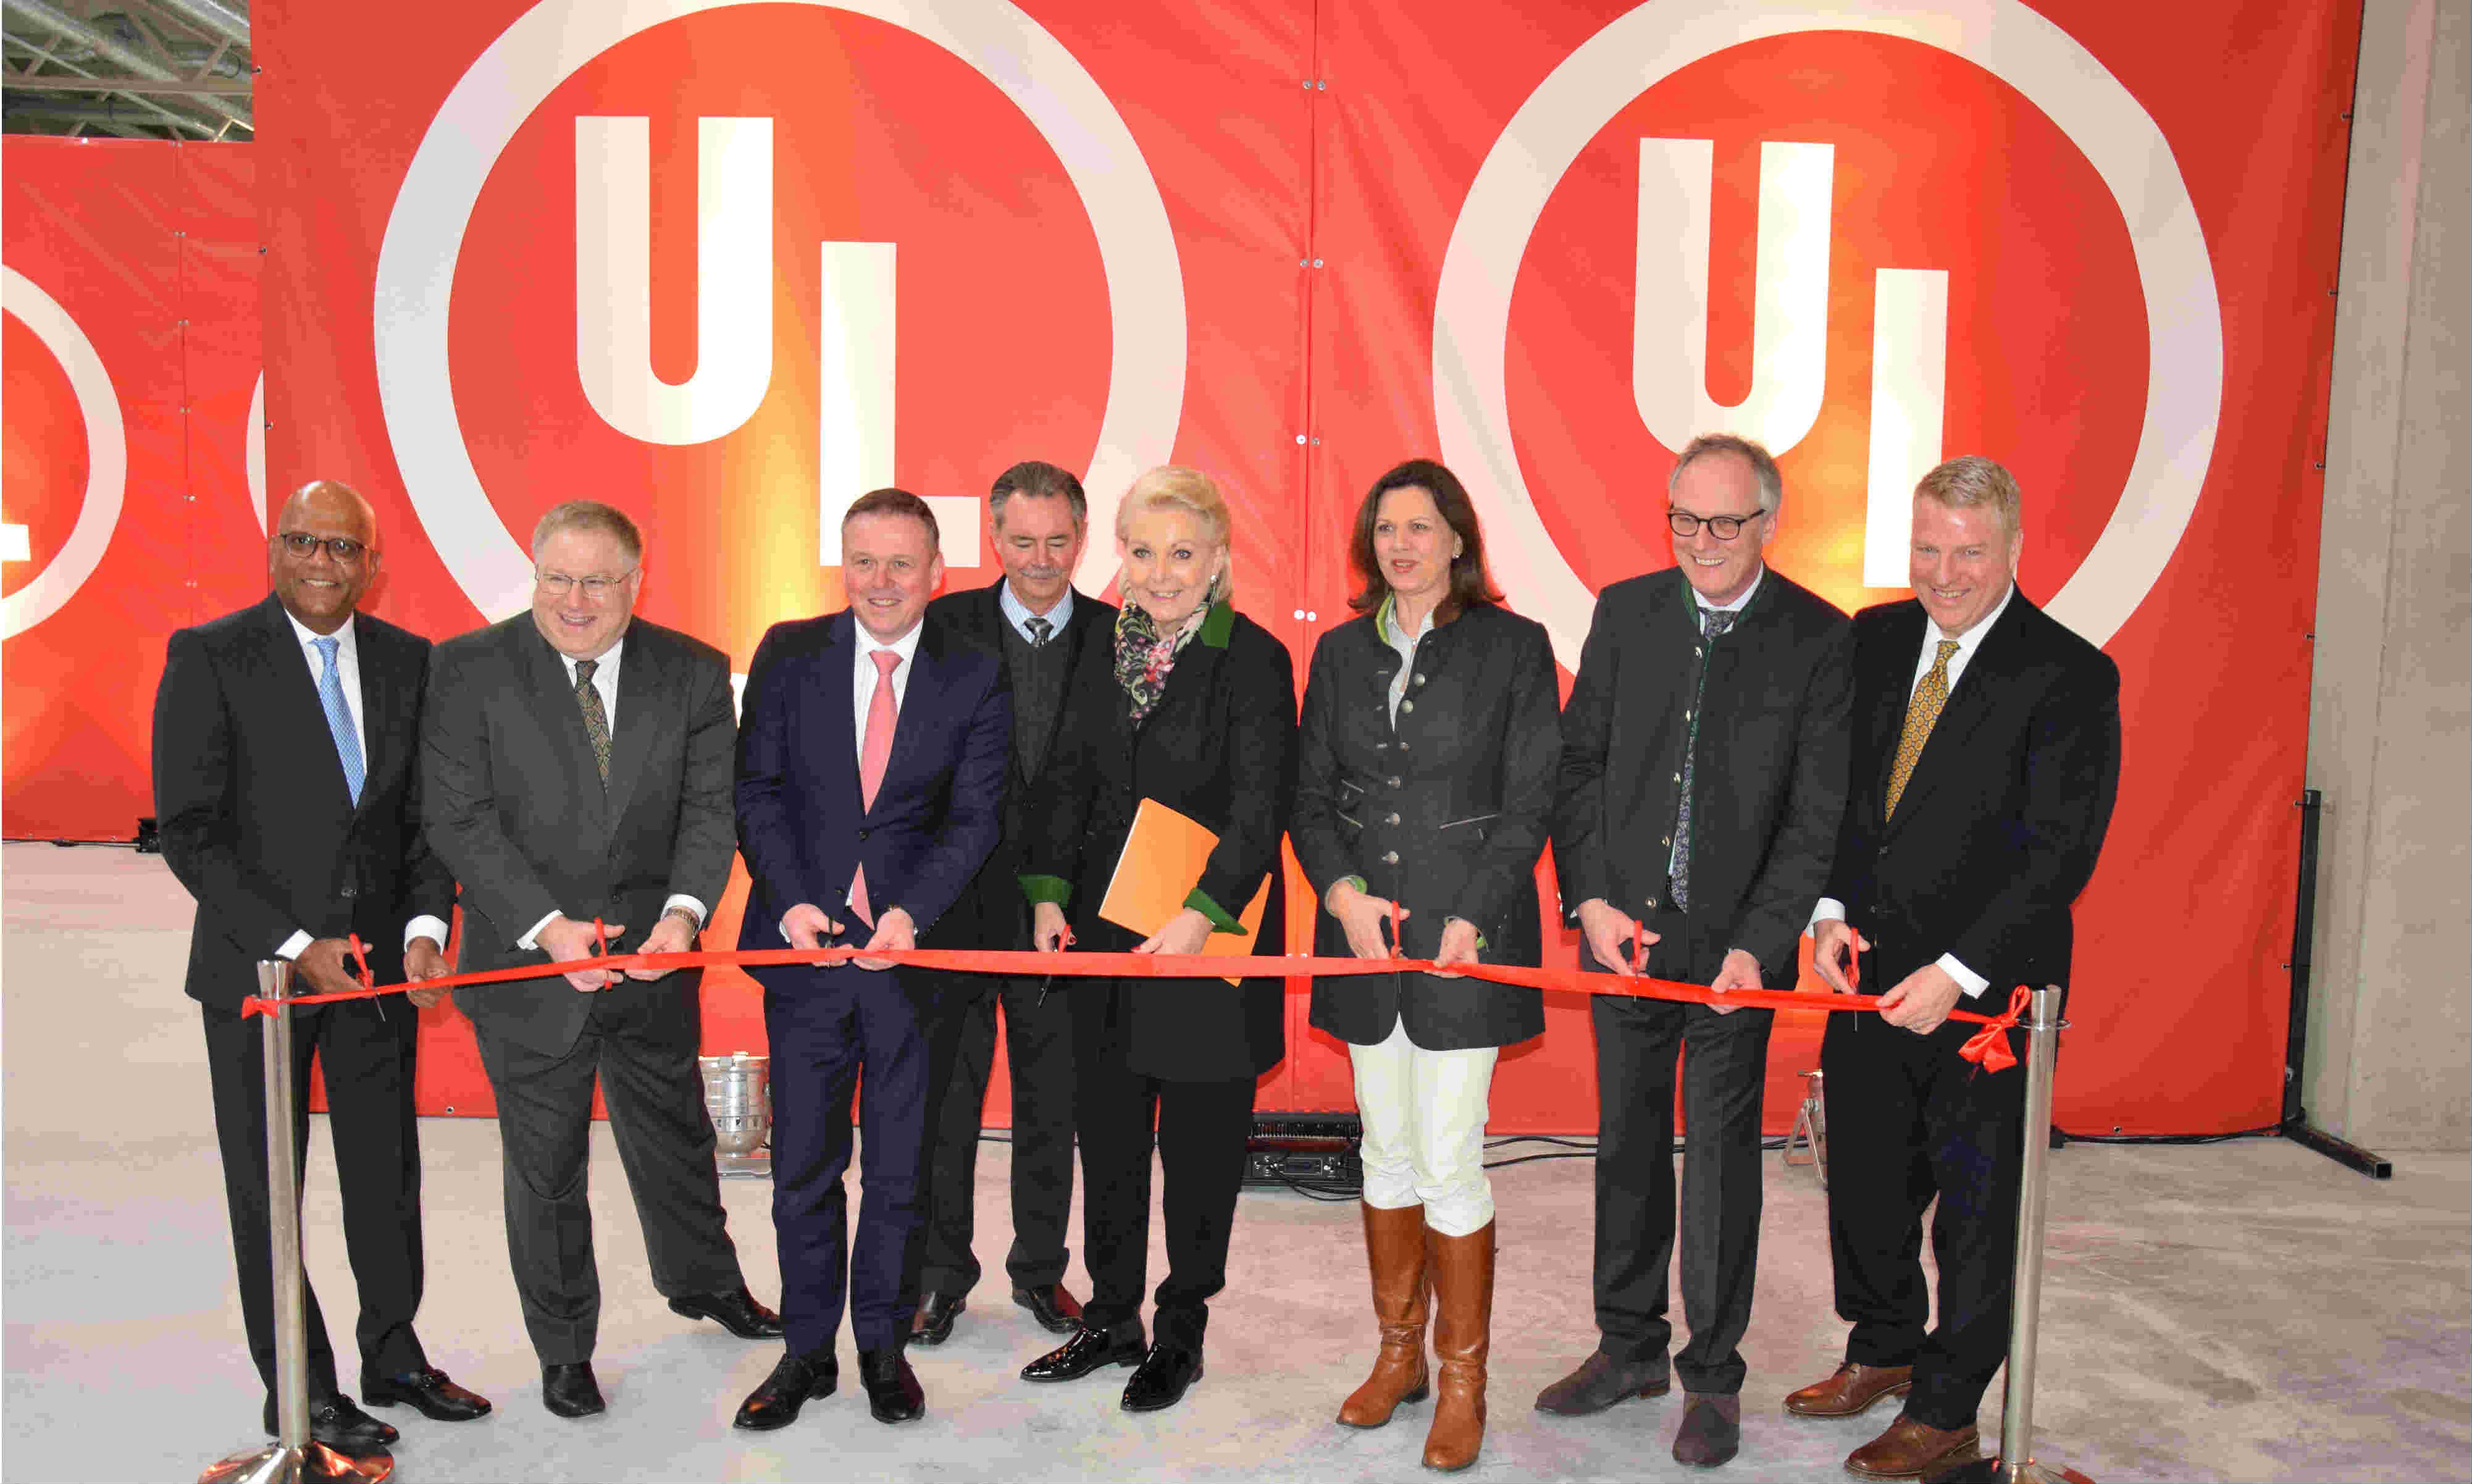 UL opens fire safety laboratory in Europe